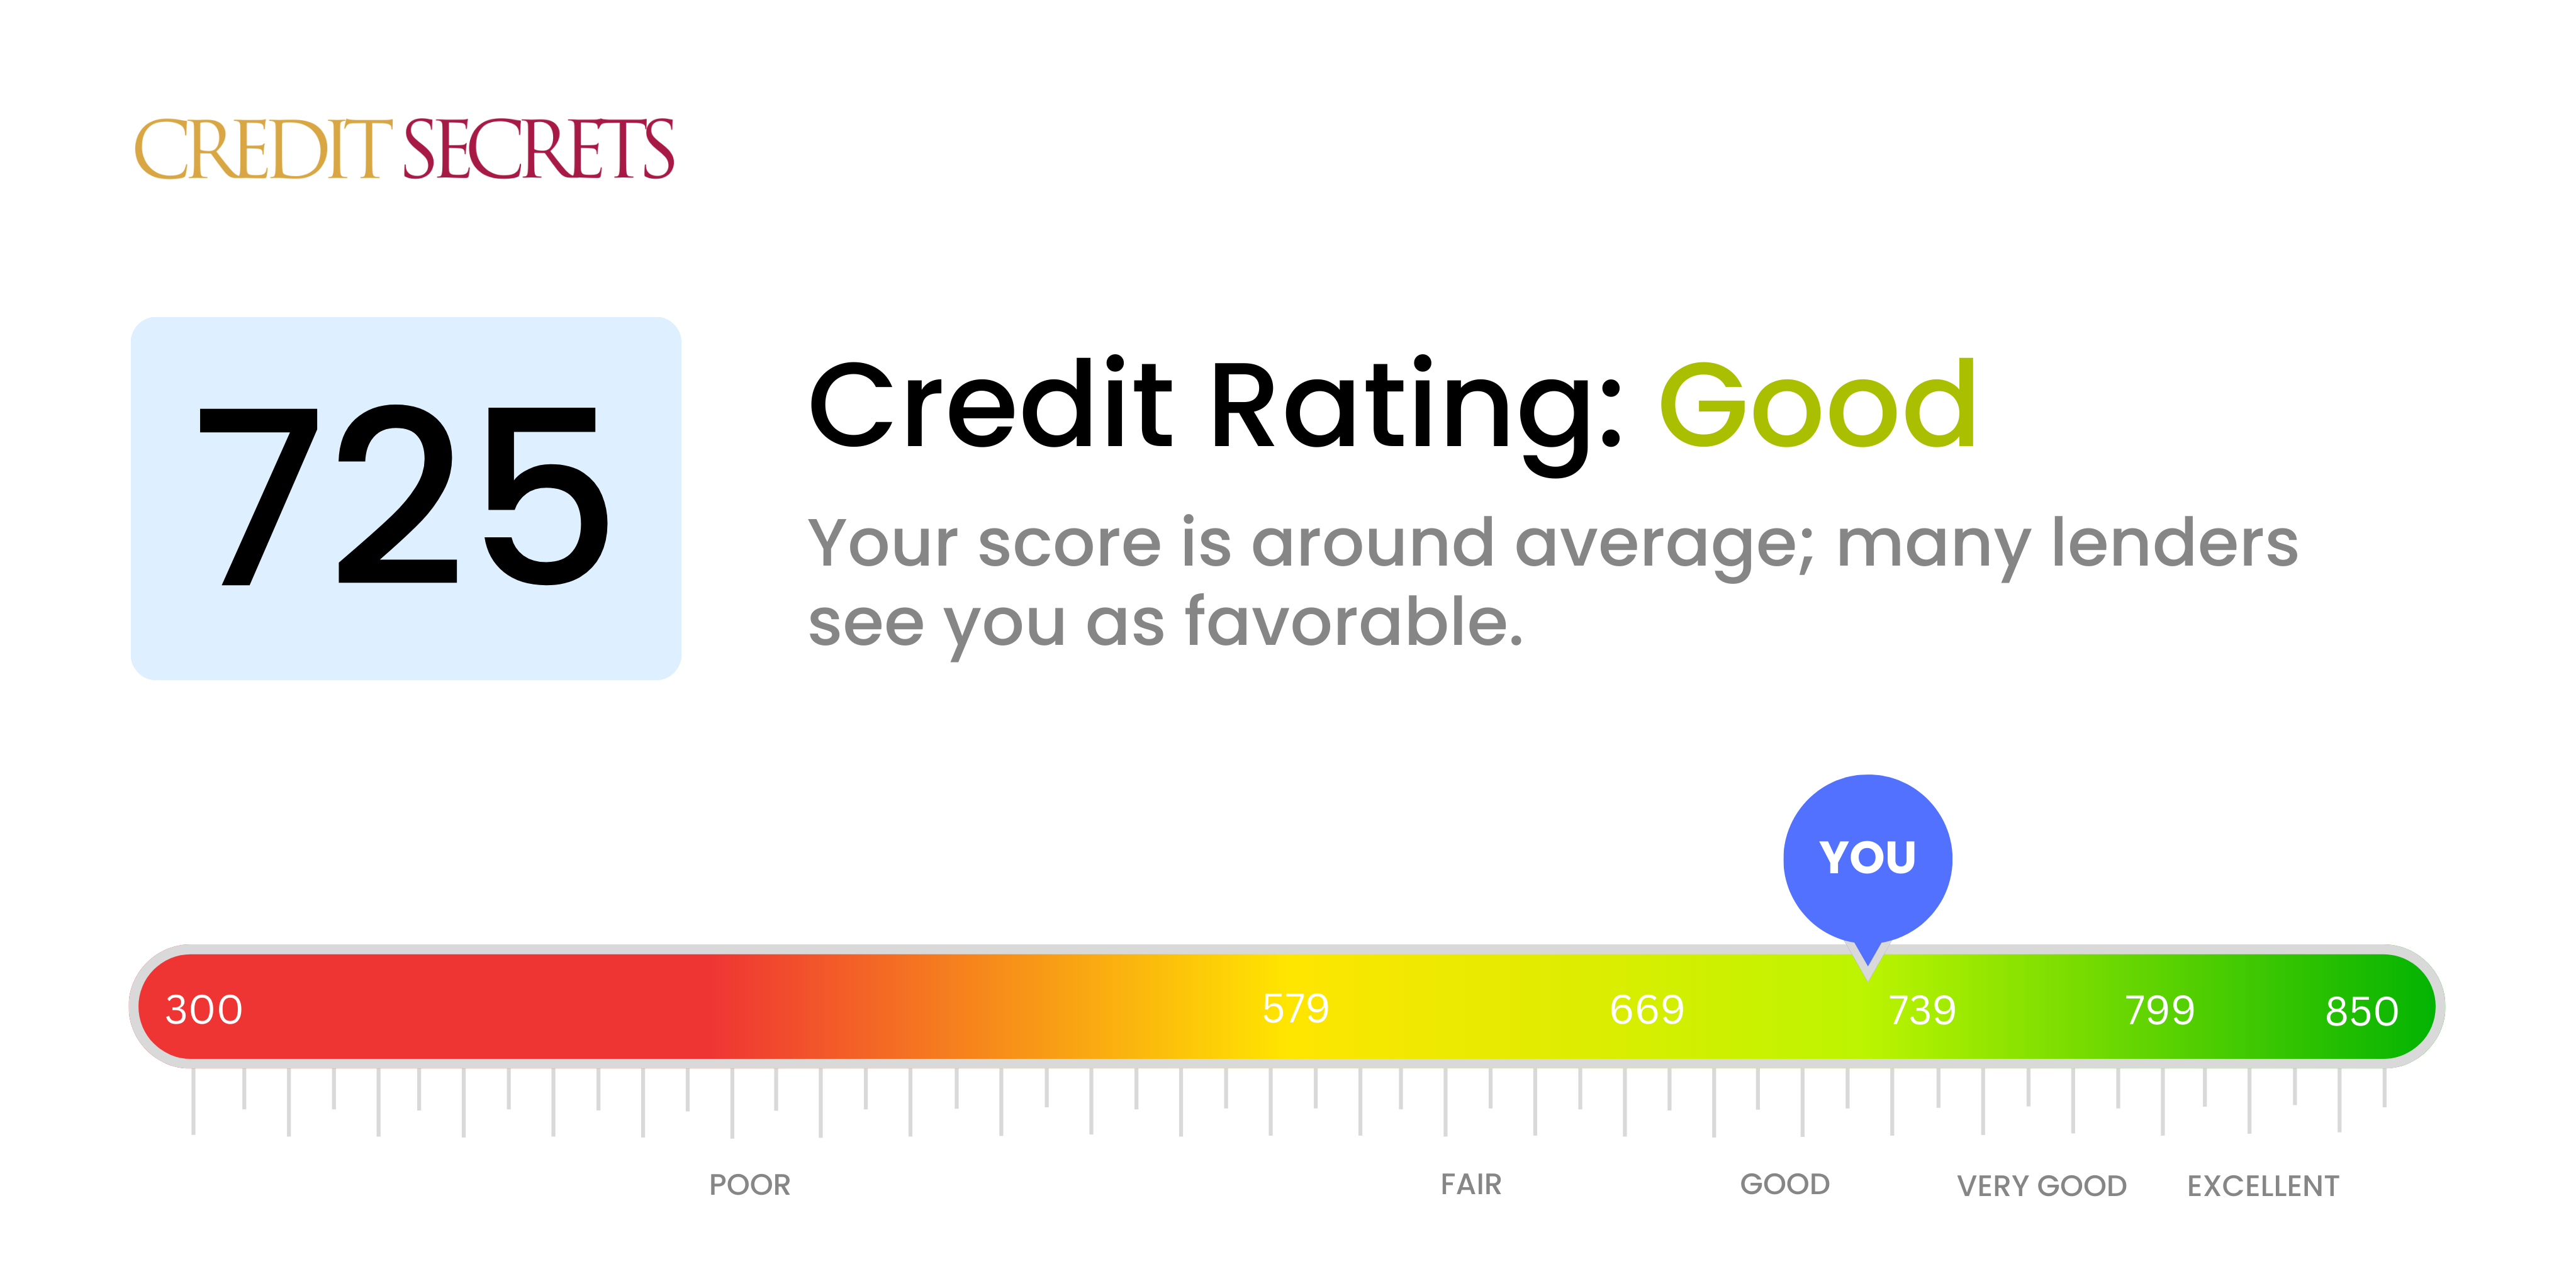 Is 725 a good credit score?